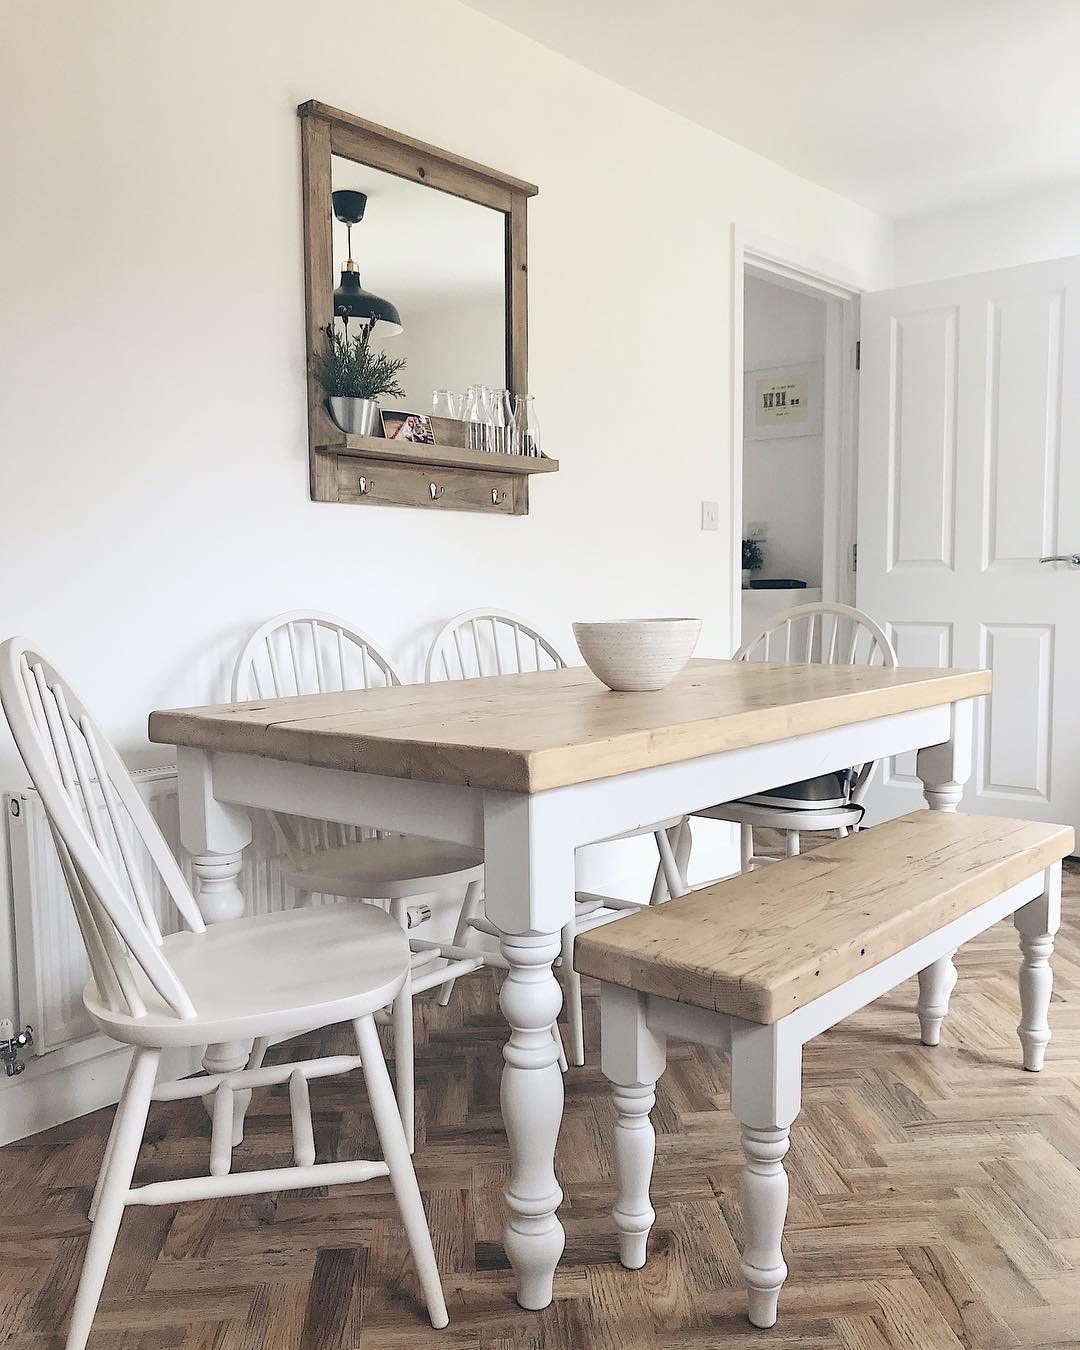 5ft Farmhouse Dining Table Set. Rustic Table With Bench and 4 Chairs.  Reclaimed Wood Top 6 Seater Kitchen Table in White - Etsy